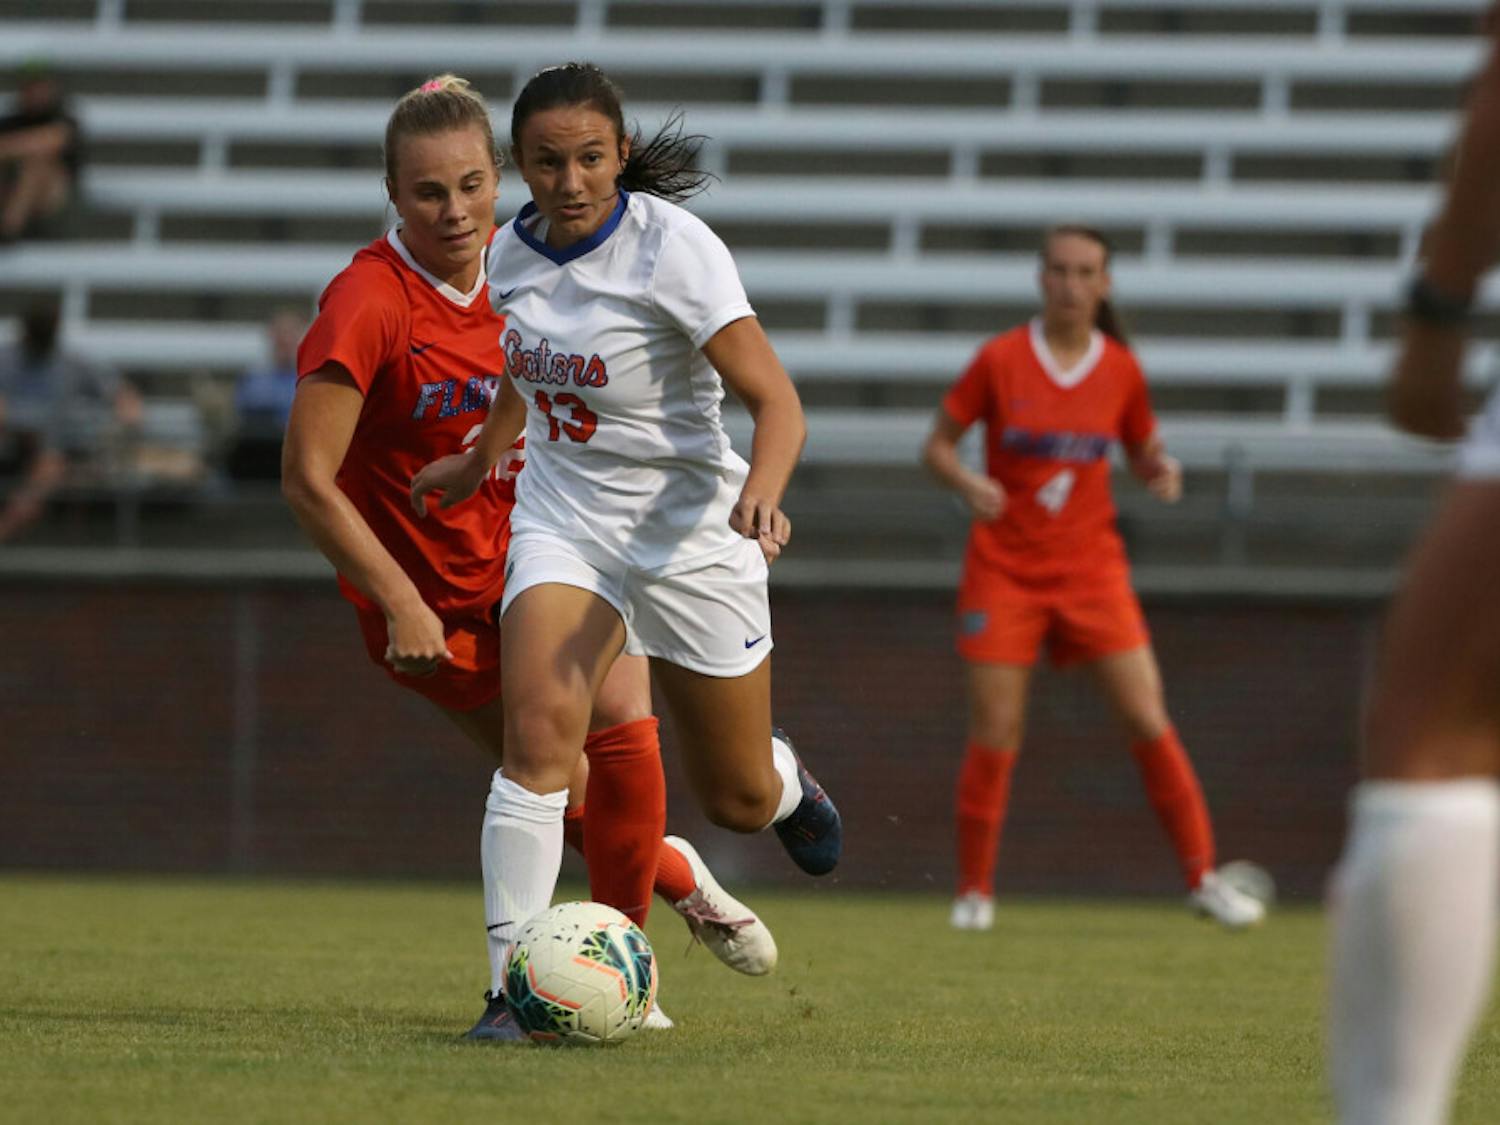 Kadzban dribbles the ball on a run during the Gators' COVID Cup scrimmage on Thursday, August 20, 2020 at Donald R. Dizney Stadium in Gainesville, Florida.